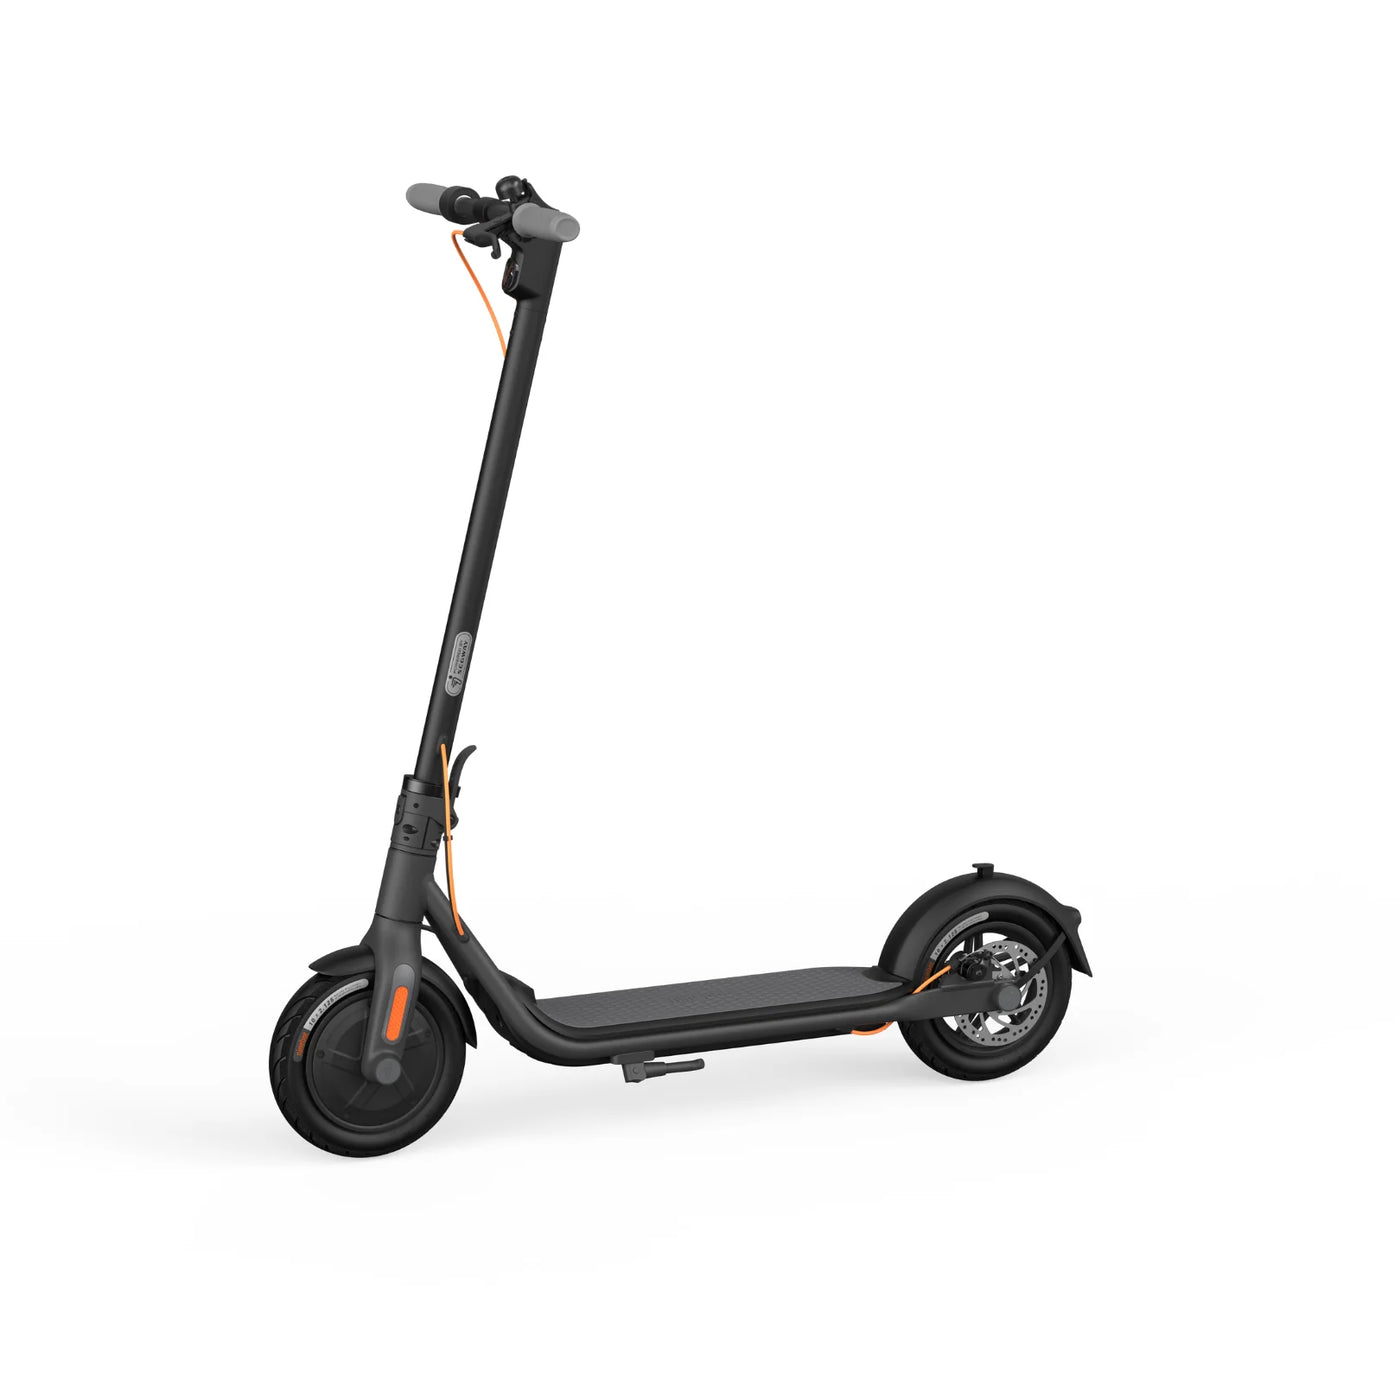 Segway-Ninebot F30 Electric Scooter 6 Months Free Service